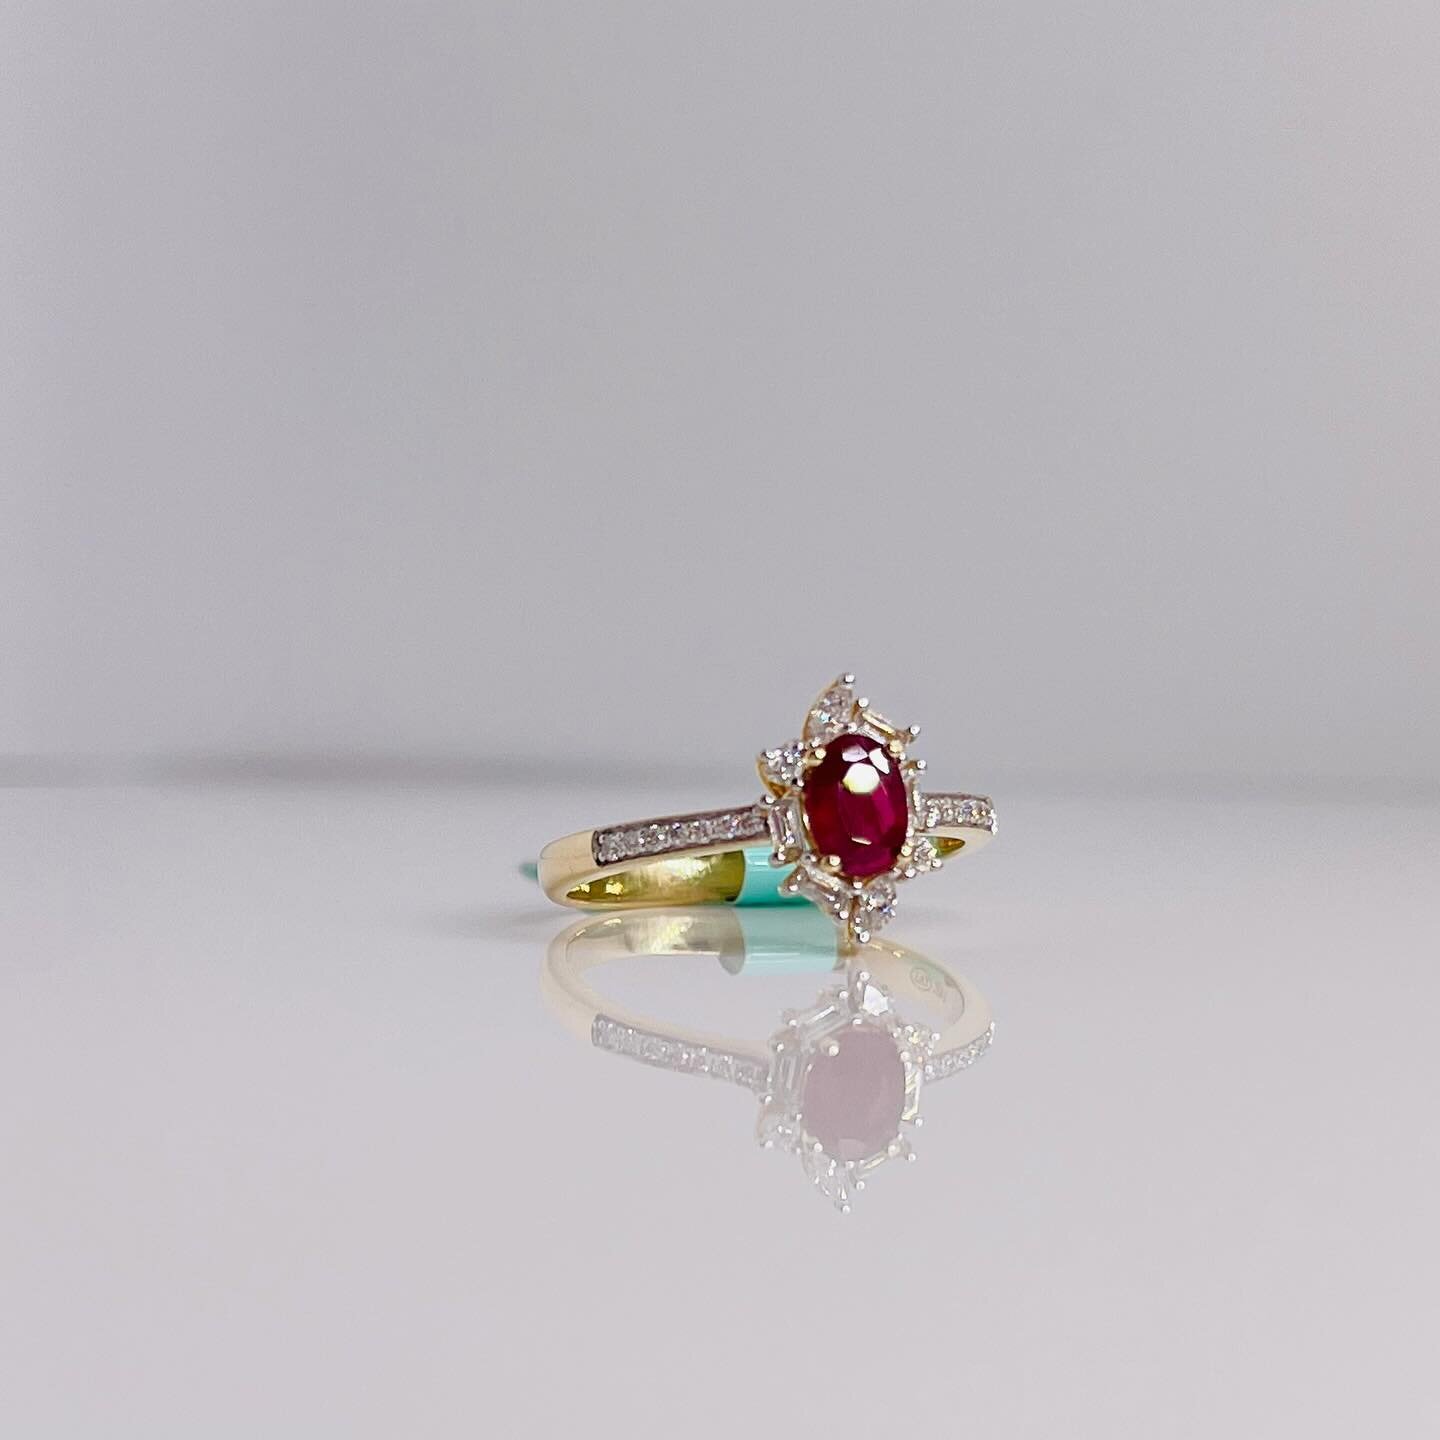 14 karat yellow gold Ruby ring with Diamonds 

Need more information?
Please message us.

#finejewel #gold #earring #ring #necklace #everyday
#18k #18kgold #18kyellowgold #whitegold  #jewellery #jewelry #canadianmade #craftsman
#love #vyi #localbusin